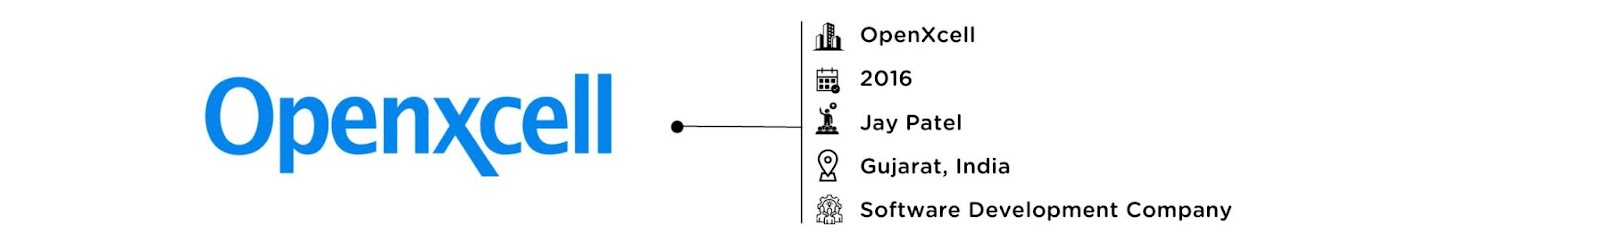 OpenXcell: Software Development Company in India